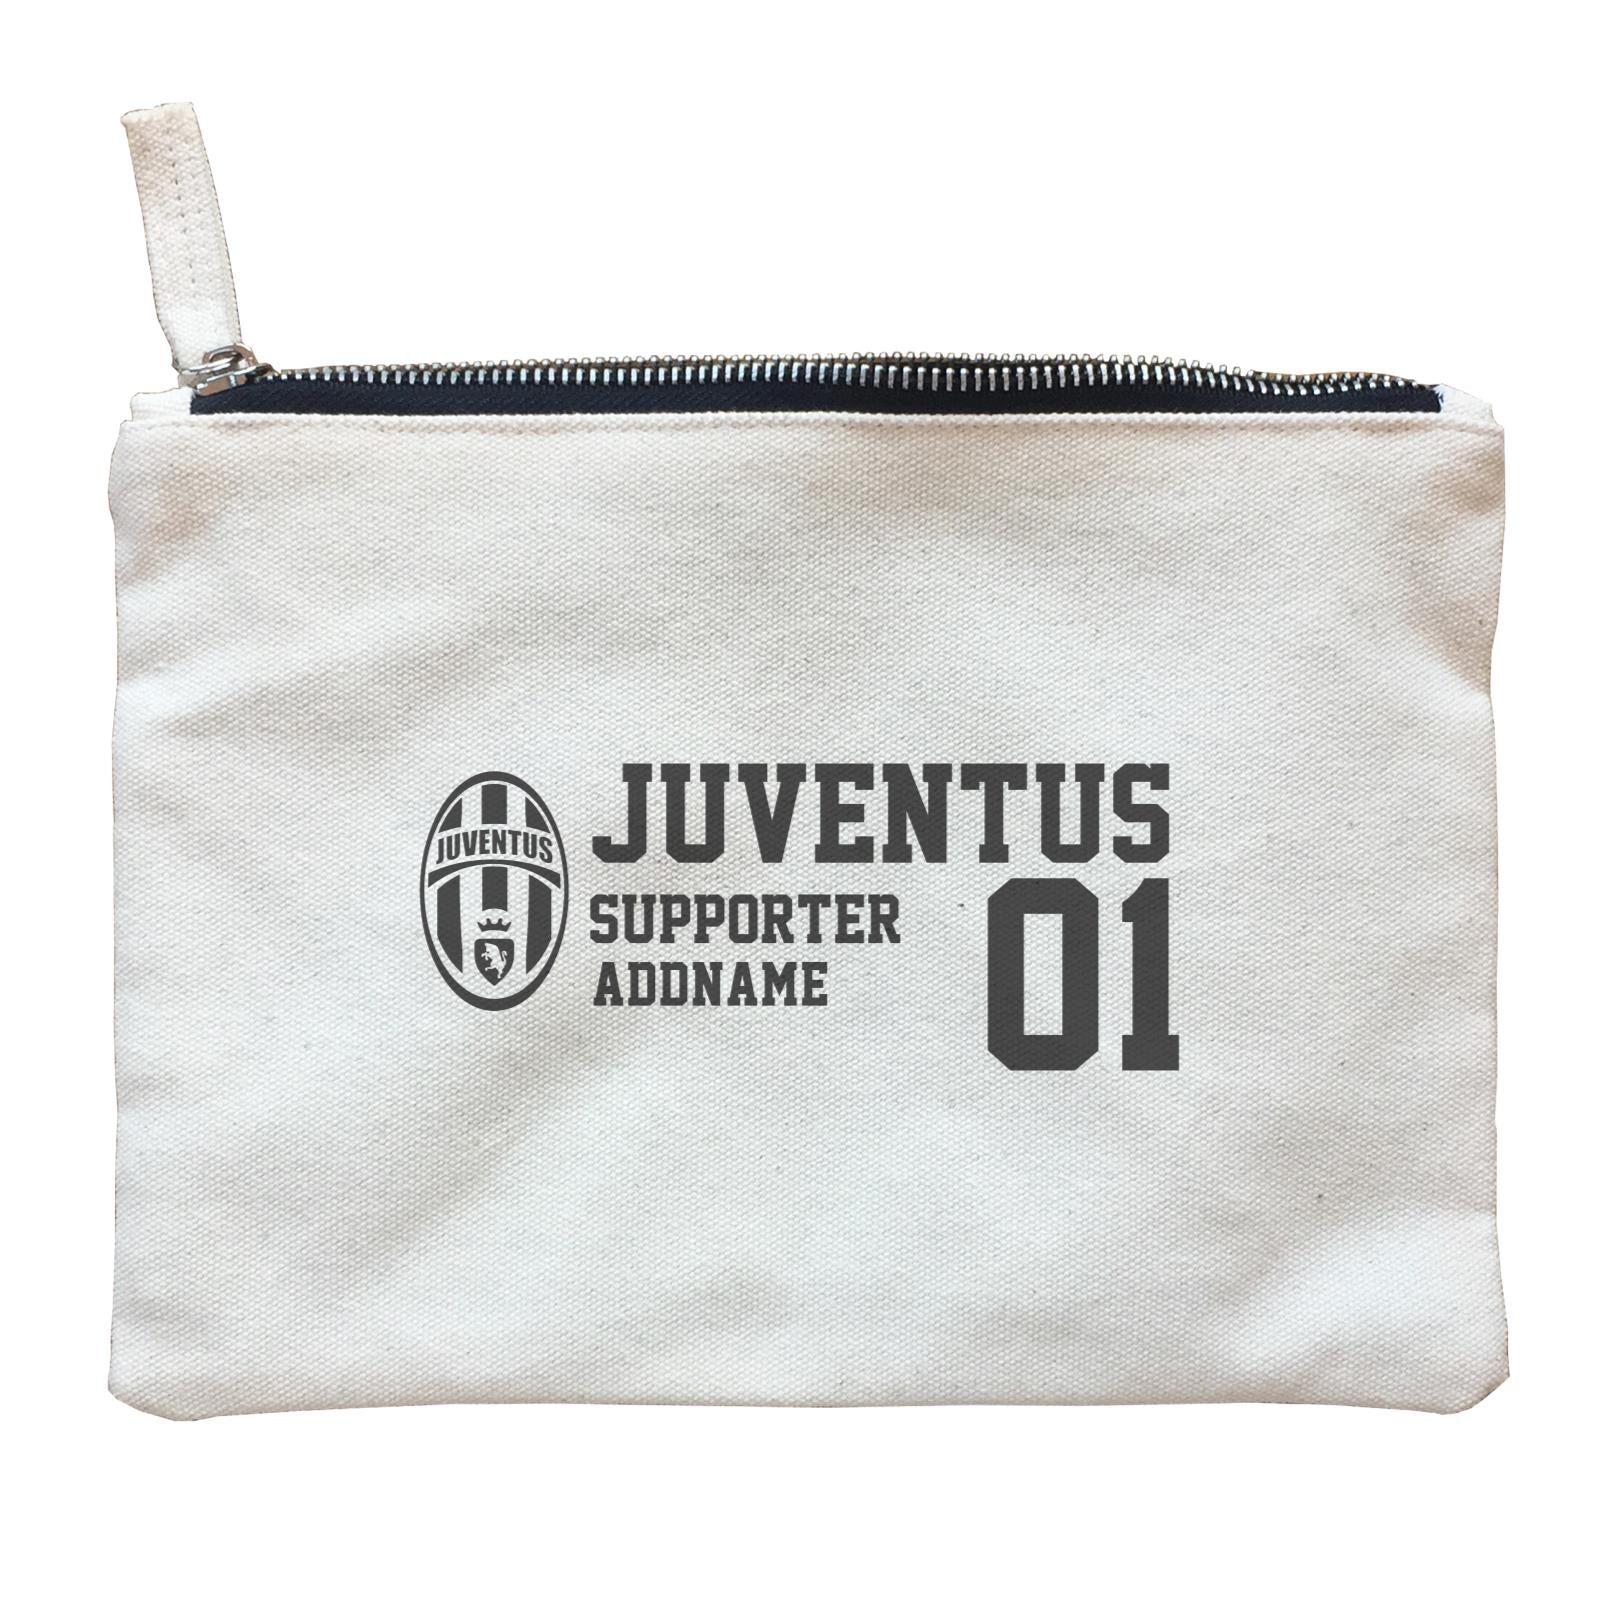 Juventus Football Supporter Accessories Addname Zipper Pouch